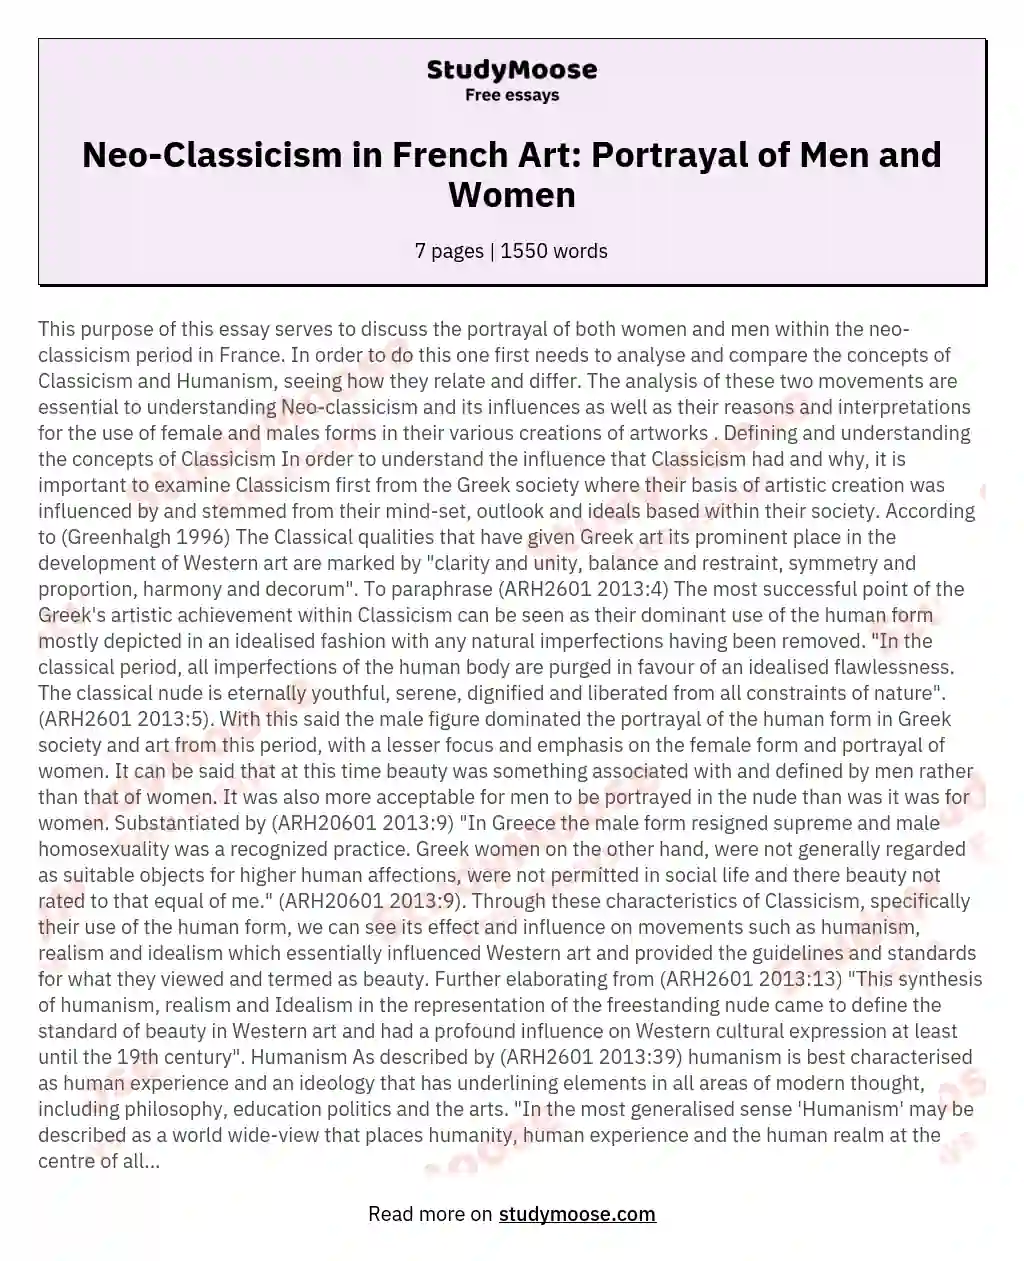 Neo-Classicism in French Art: Portrayal of Men and Women essay